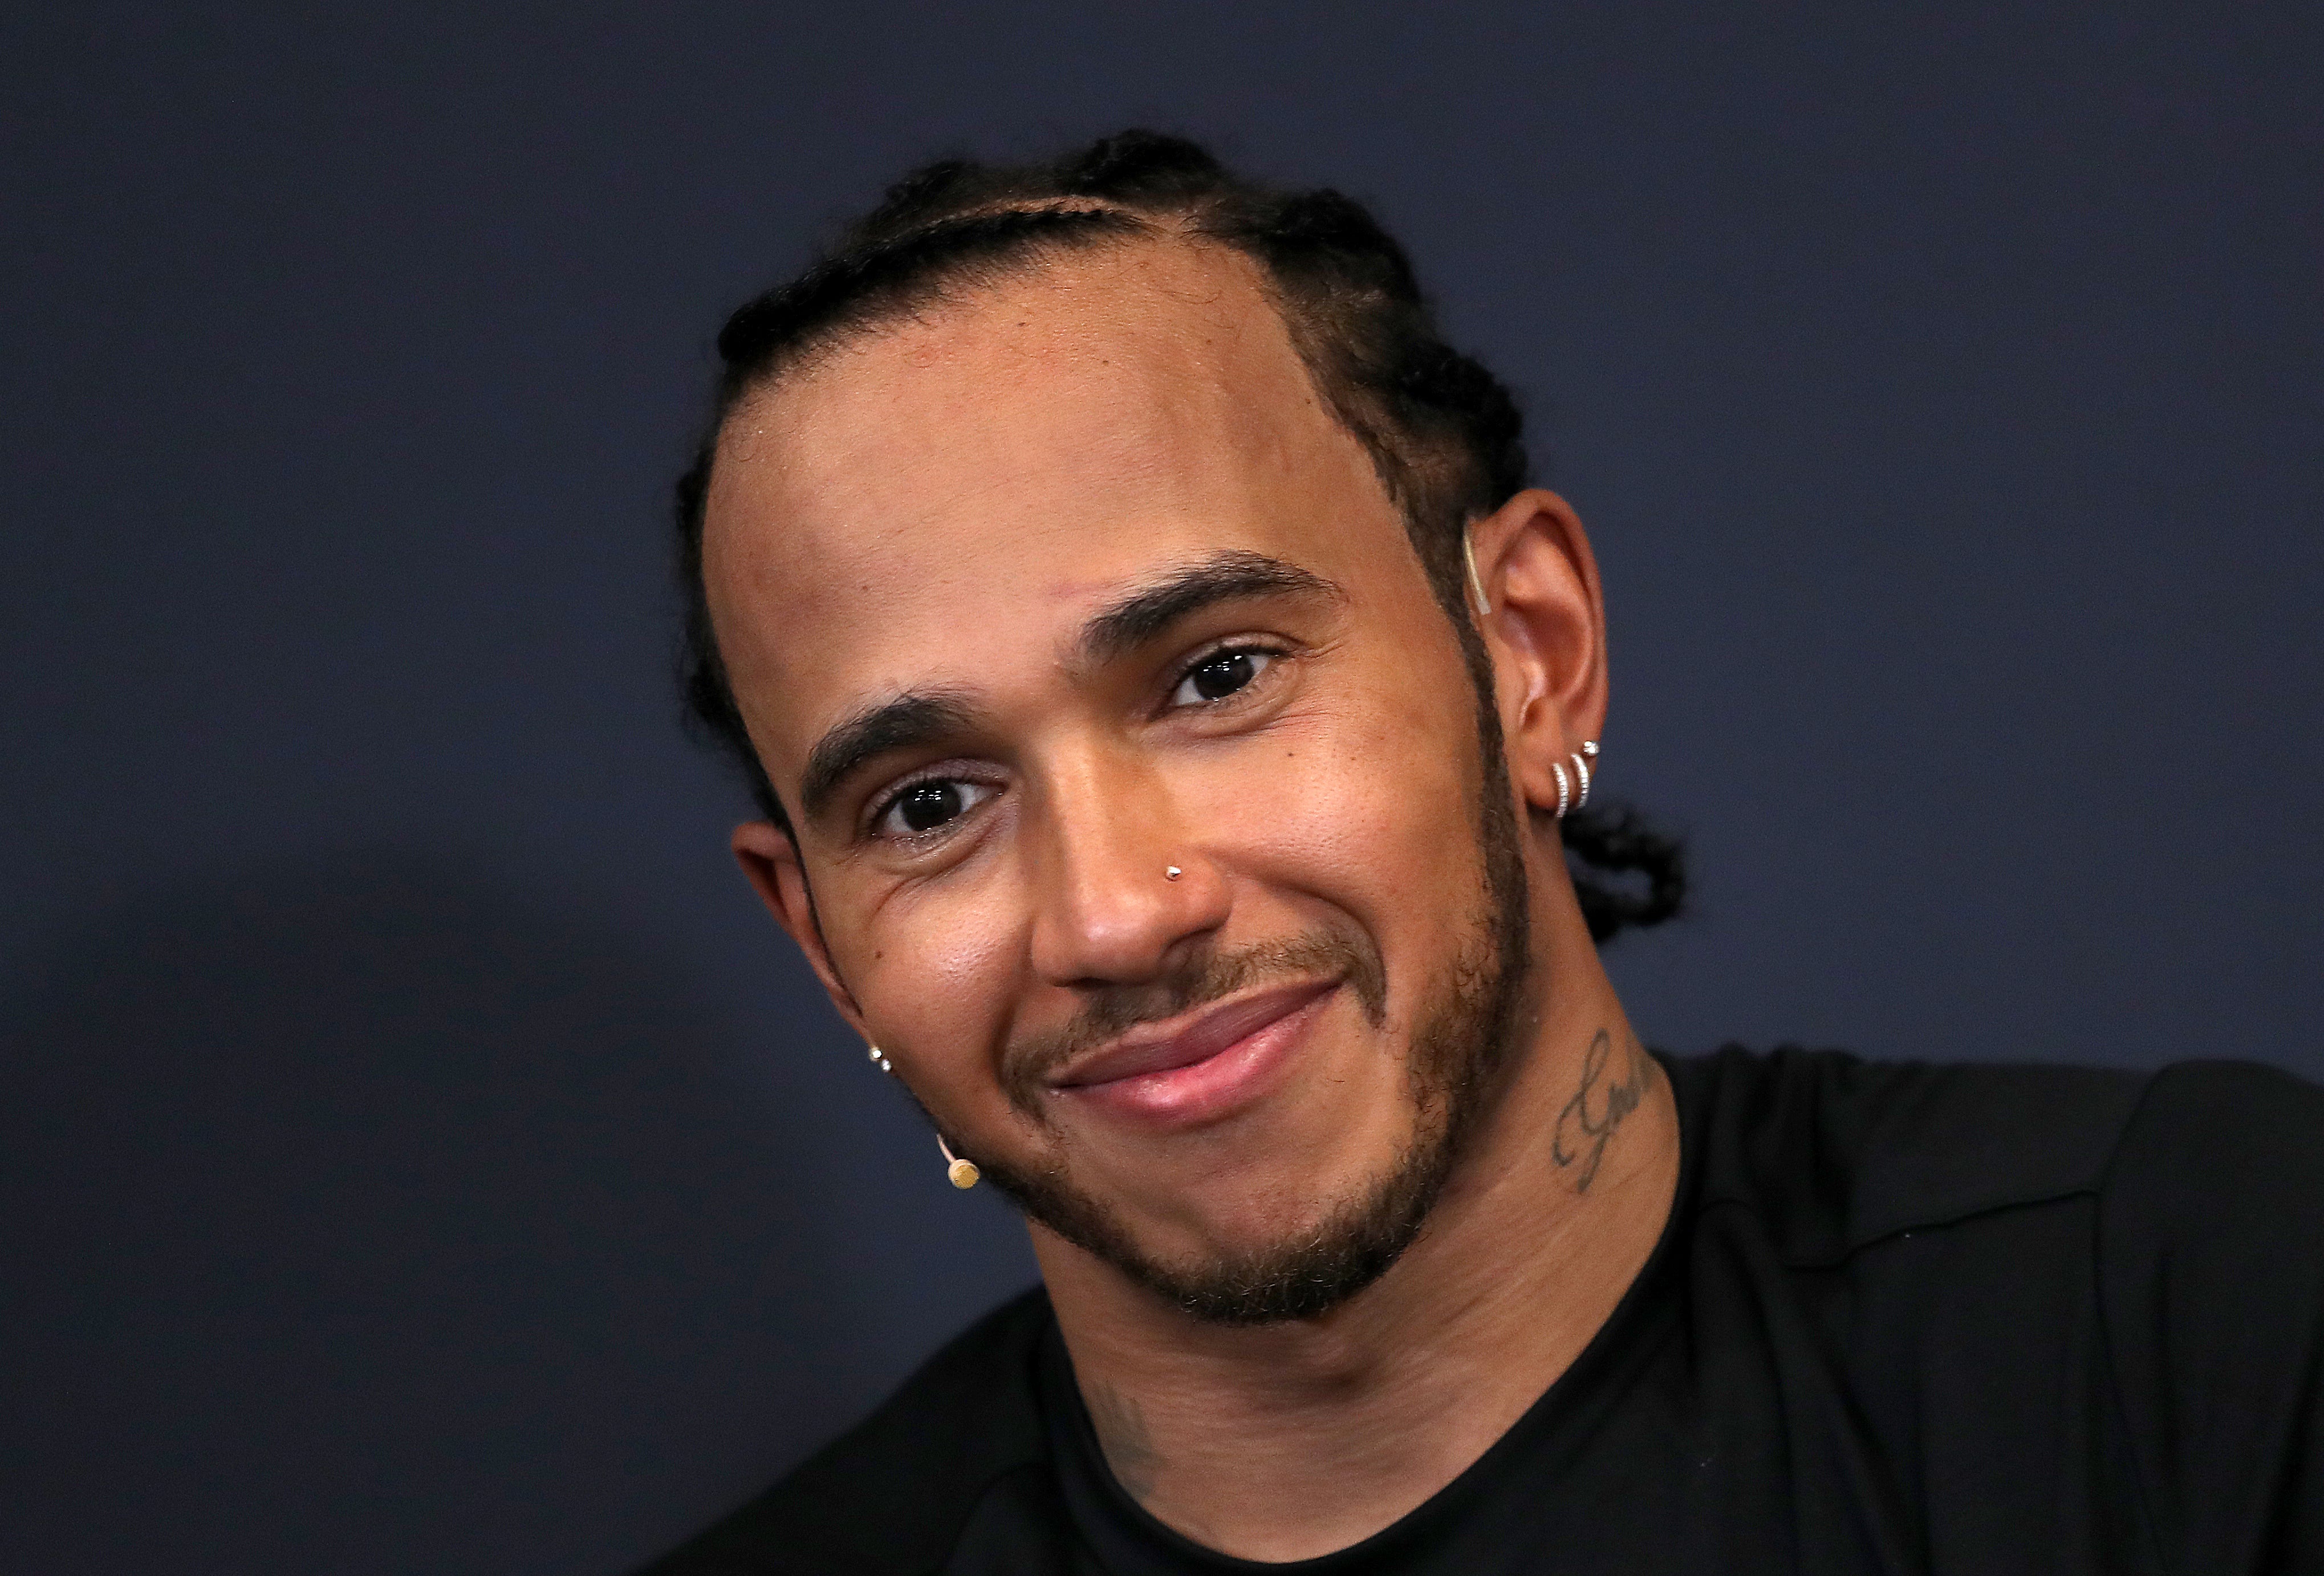 Lewis Hamilton (pictured) removed his nose stud ahead of opening practice for the British Grand Prix (David Davies/PA Images).